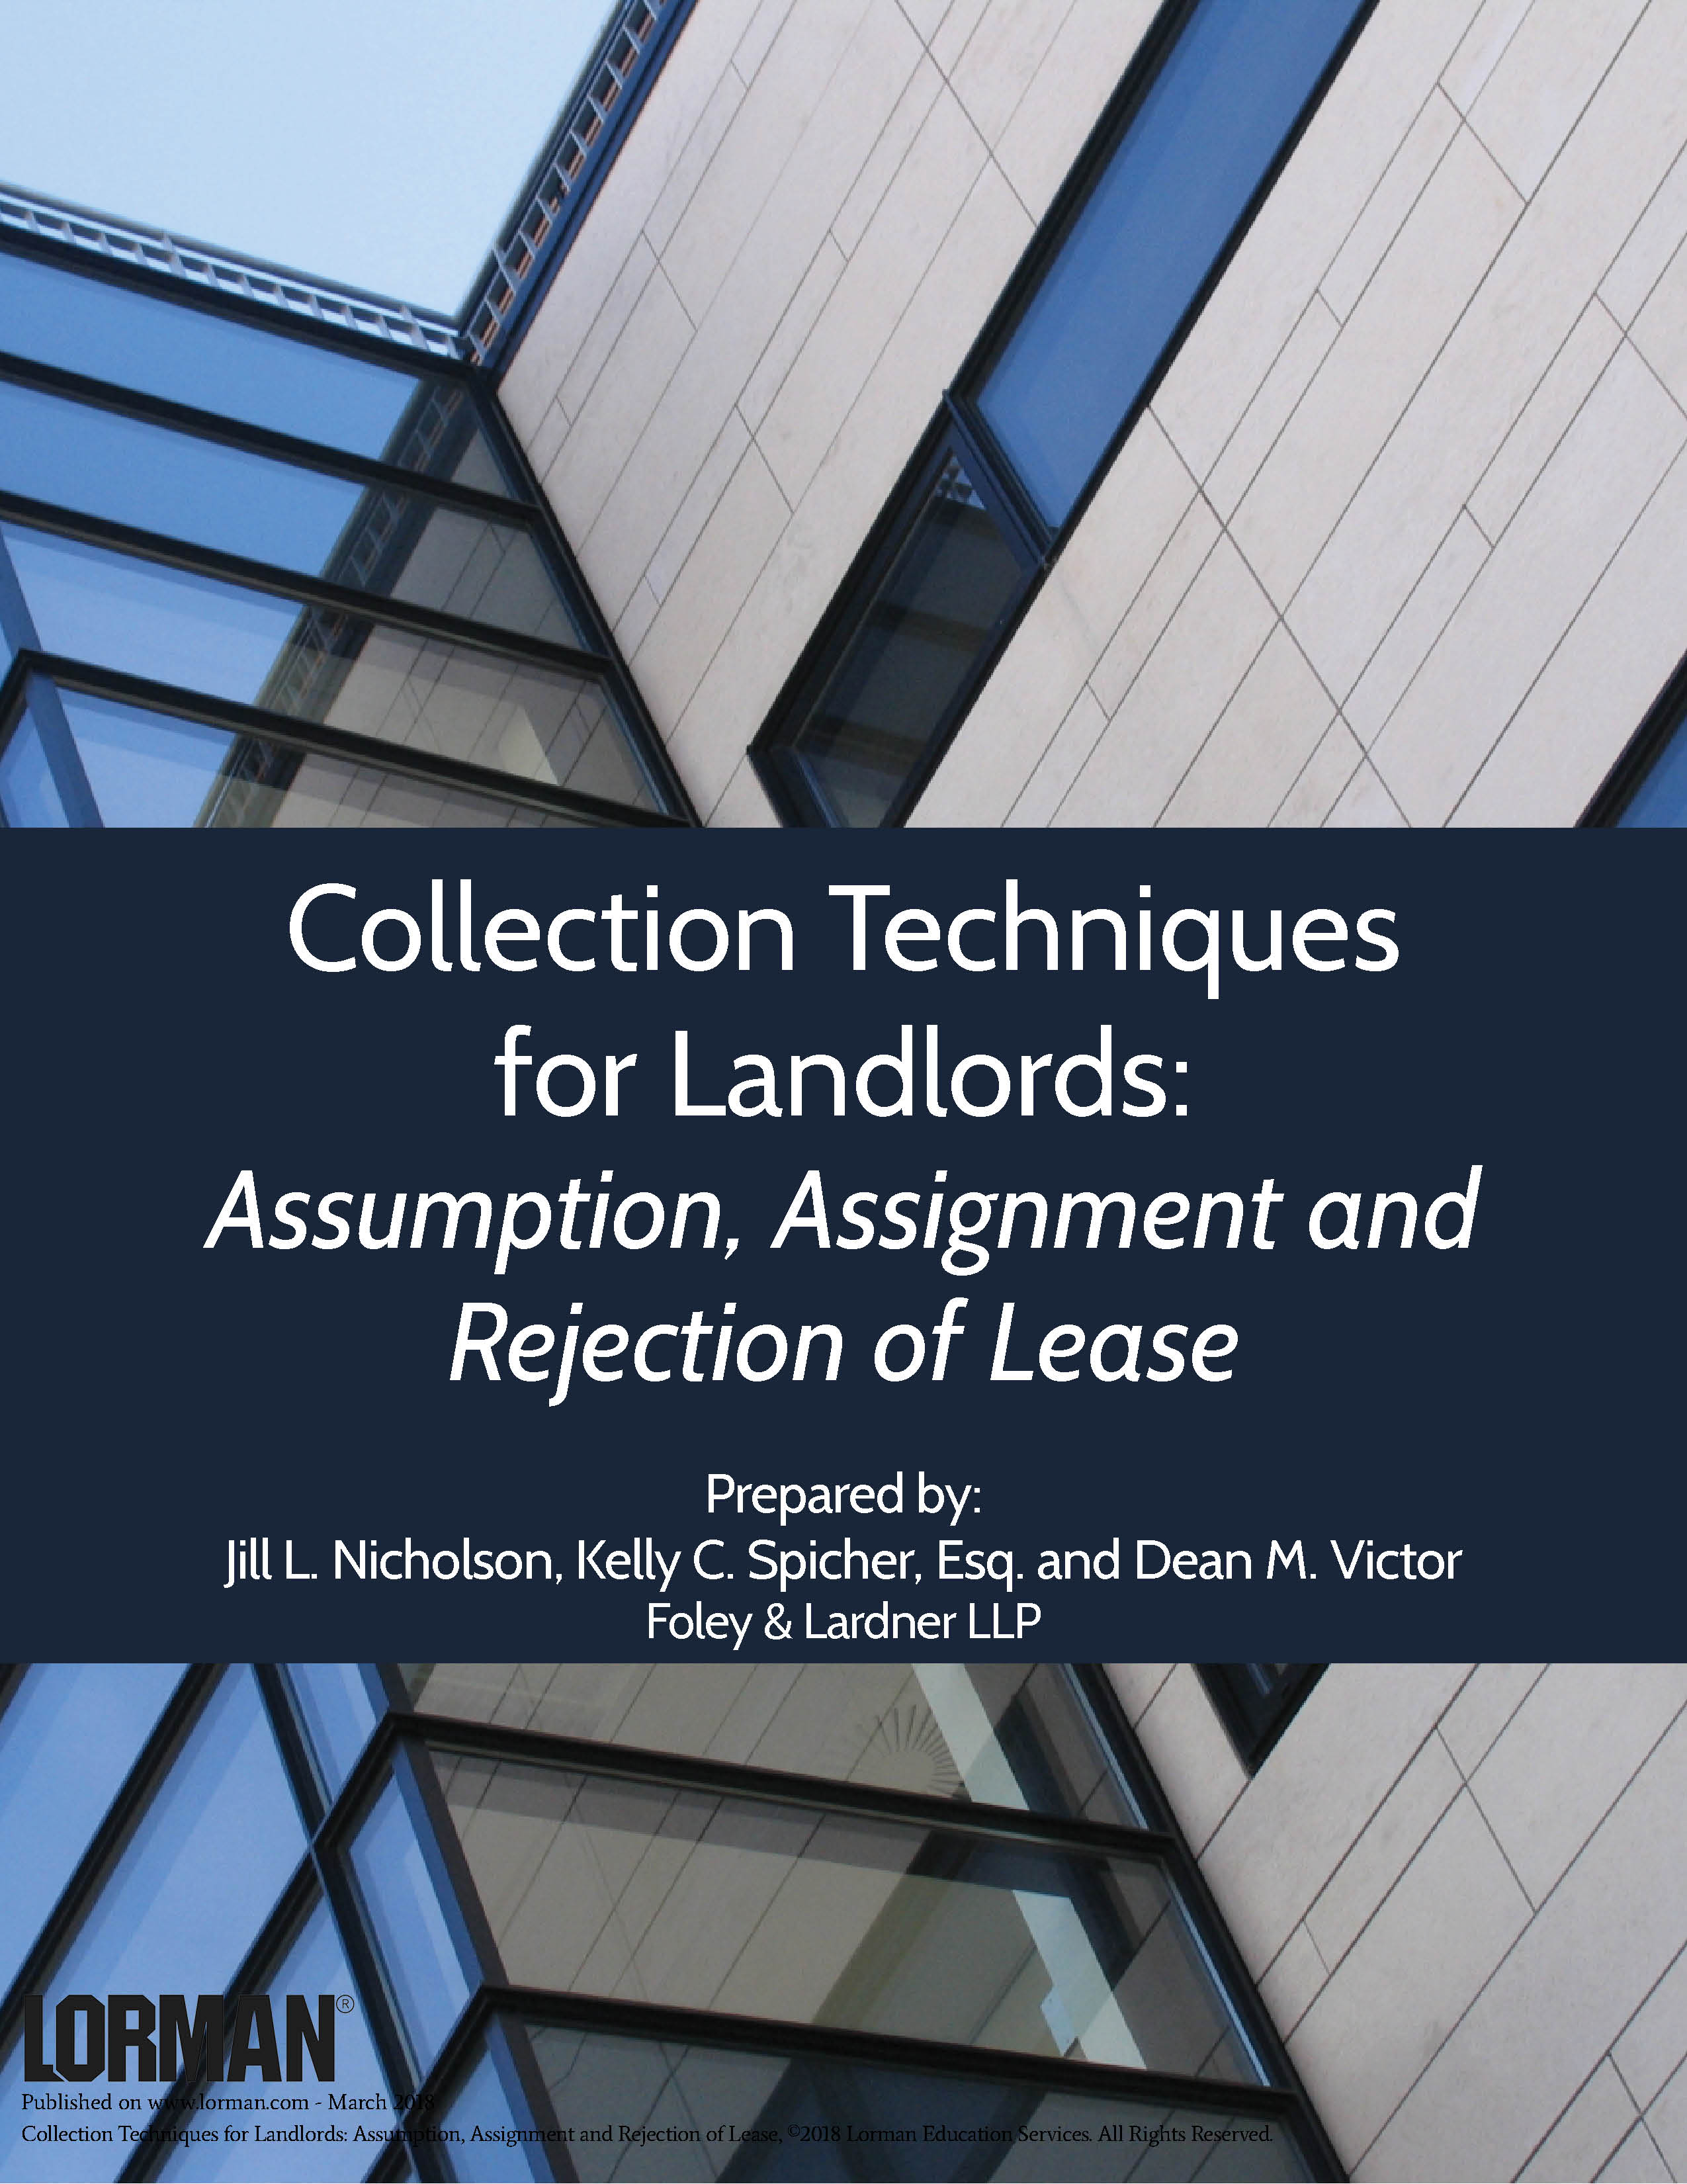 Collection Techniques for Landlords: Assumption, Assignment and Rejection of Lease